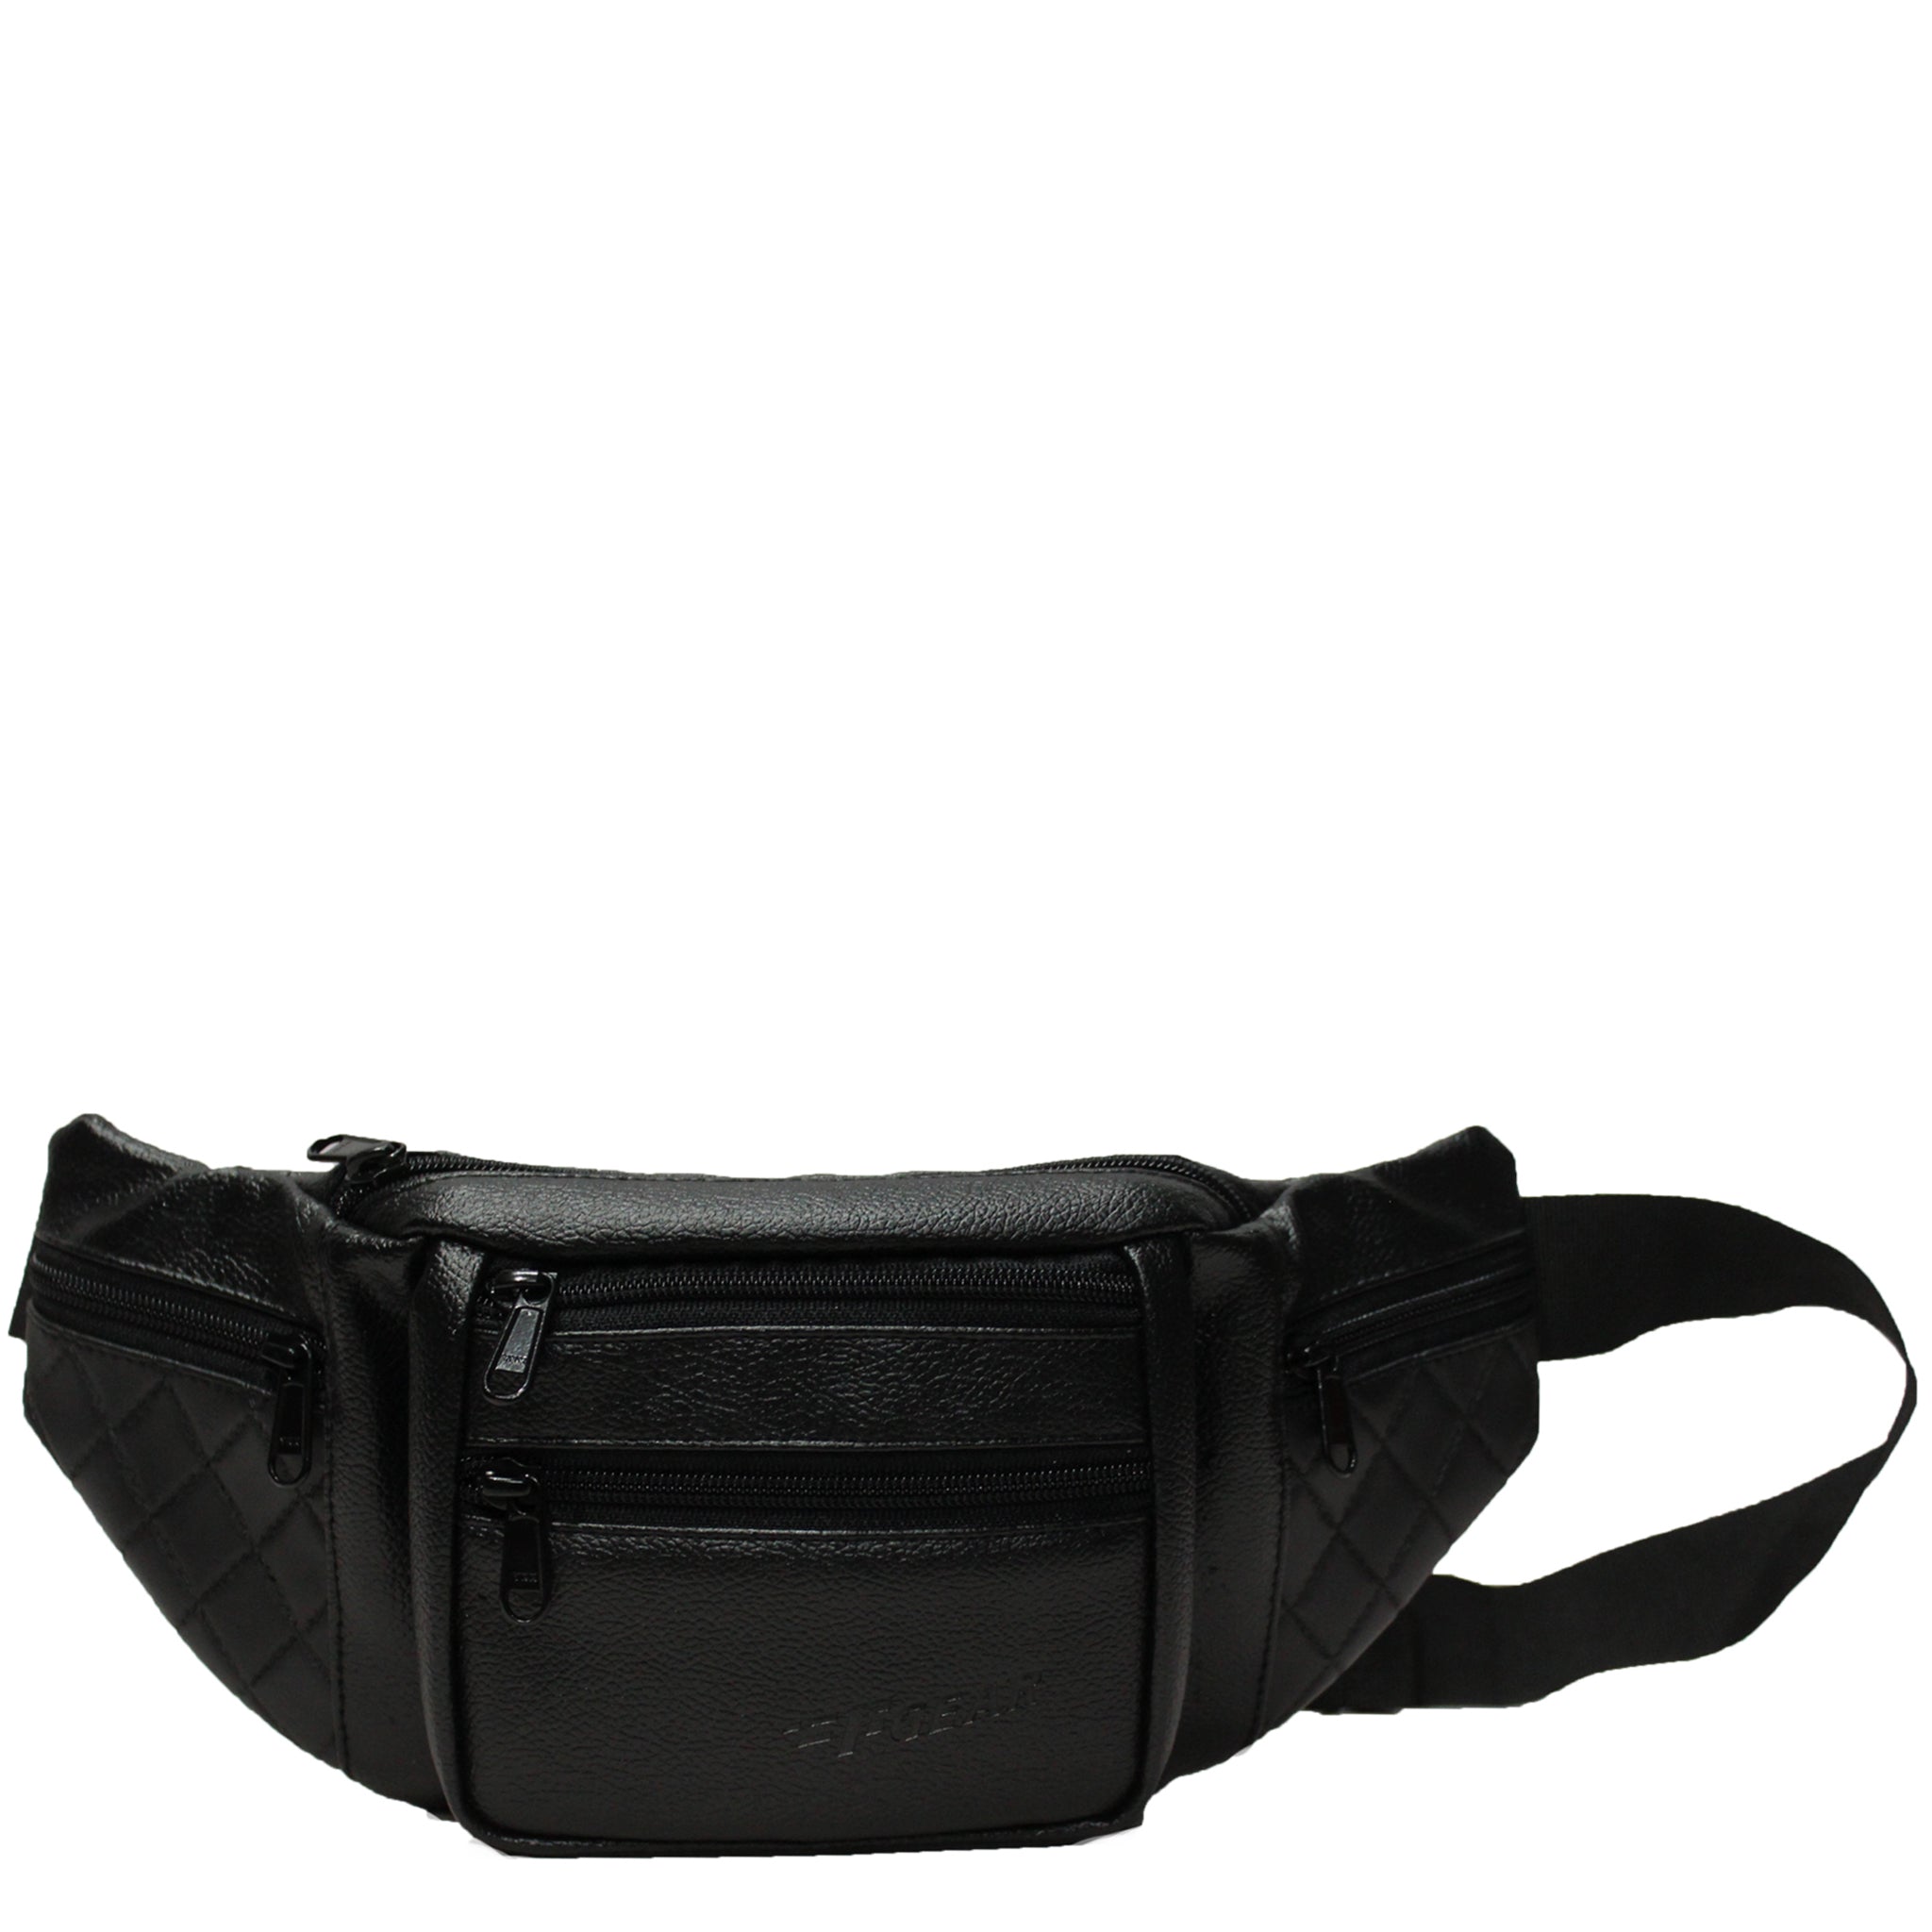 miss fong Fanny Packs for Women, Belt Bag, Waist Bag, Leather Fanny Pack  with 9 Pockets. (Black) : Amazon.in: Bags, Wallets and Luggage